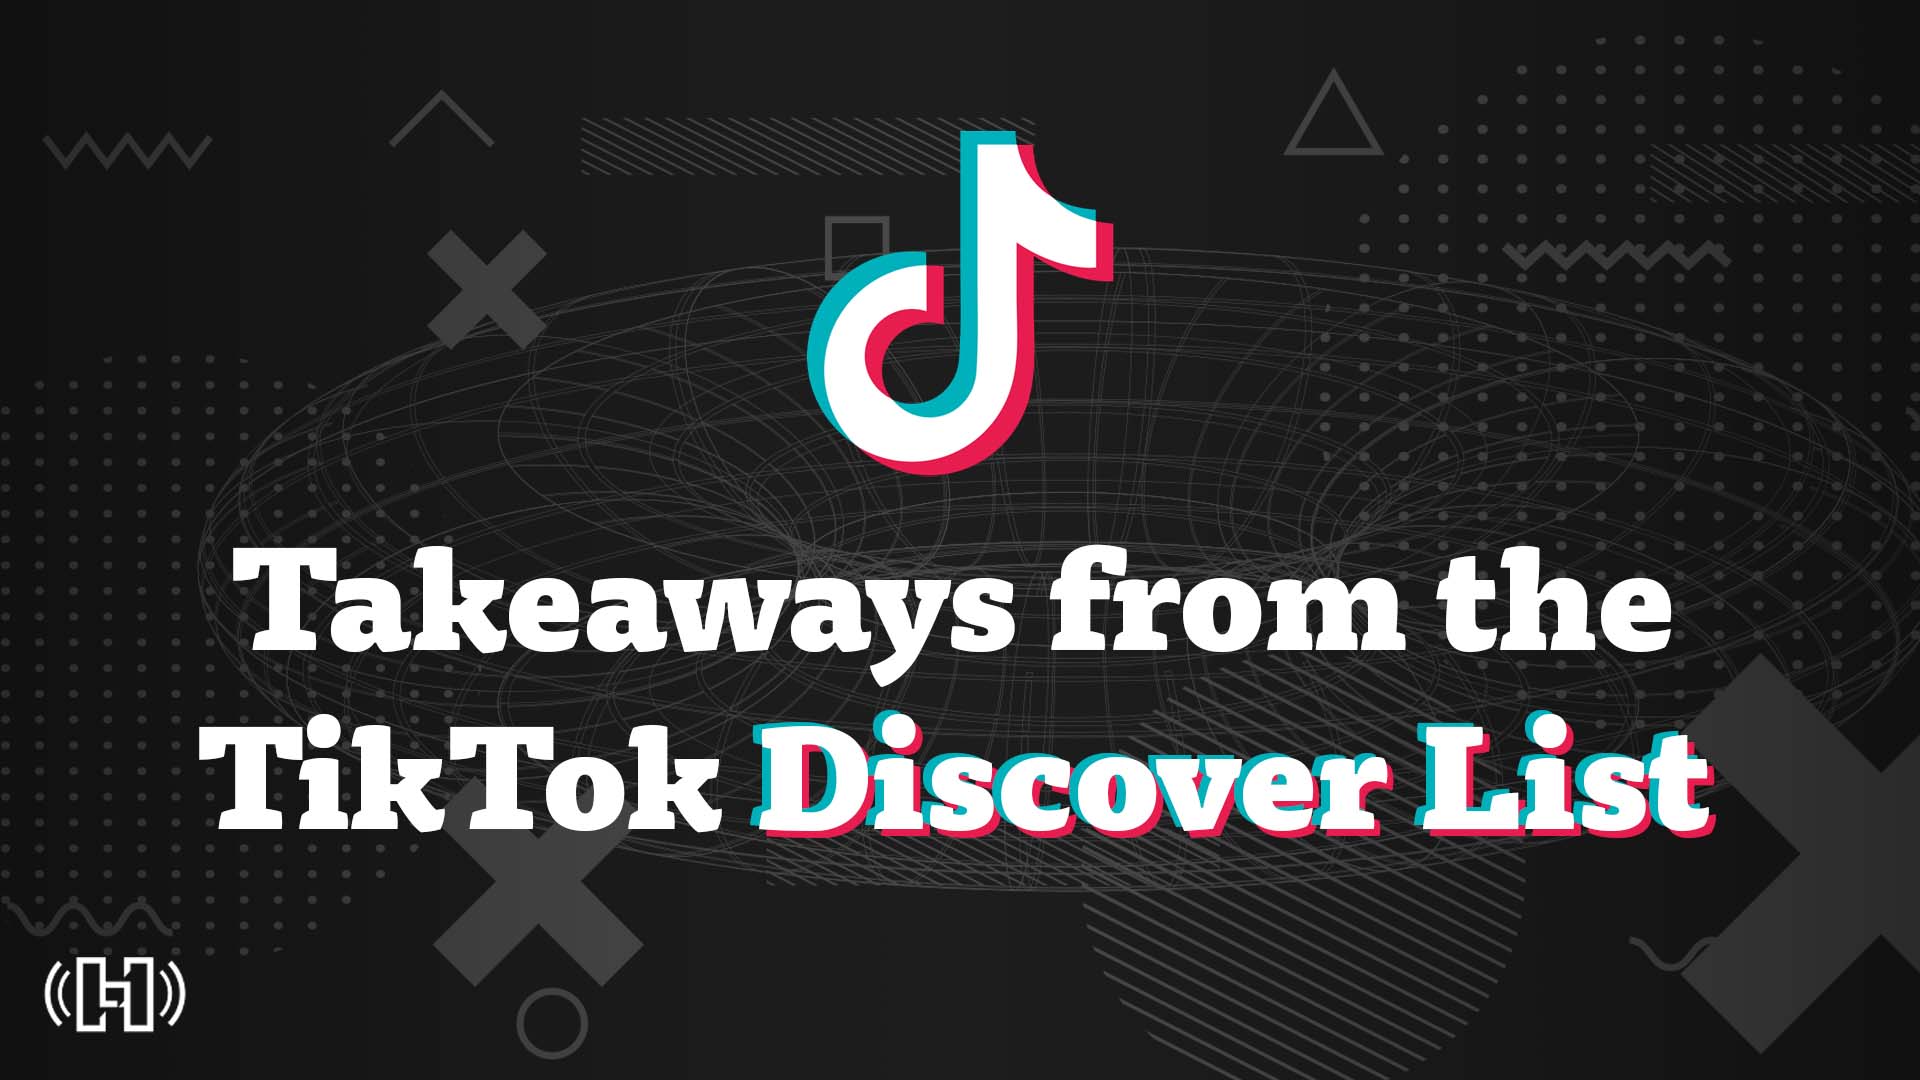 Featured Image for Takeaways from the TikTok Discover List blog from Hurrdat Media